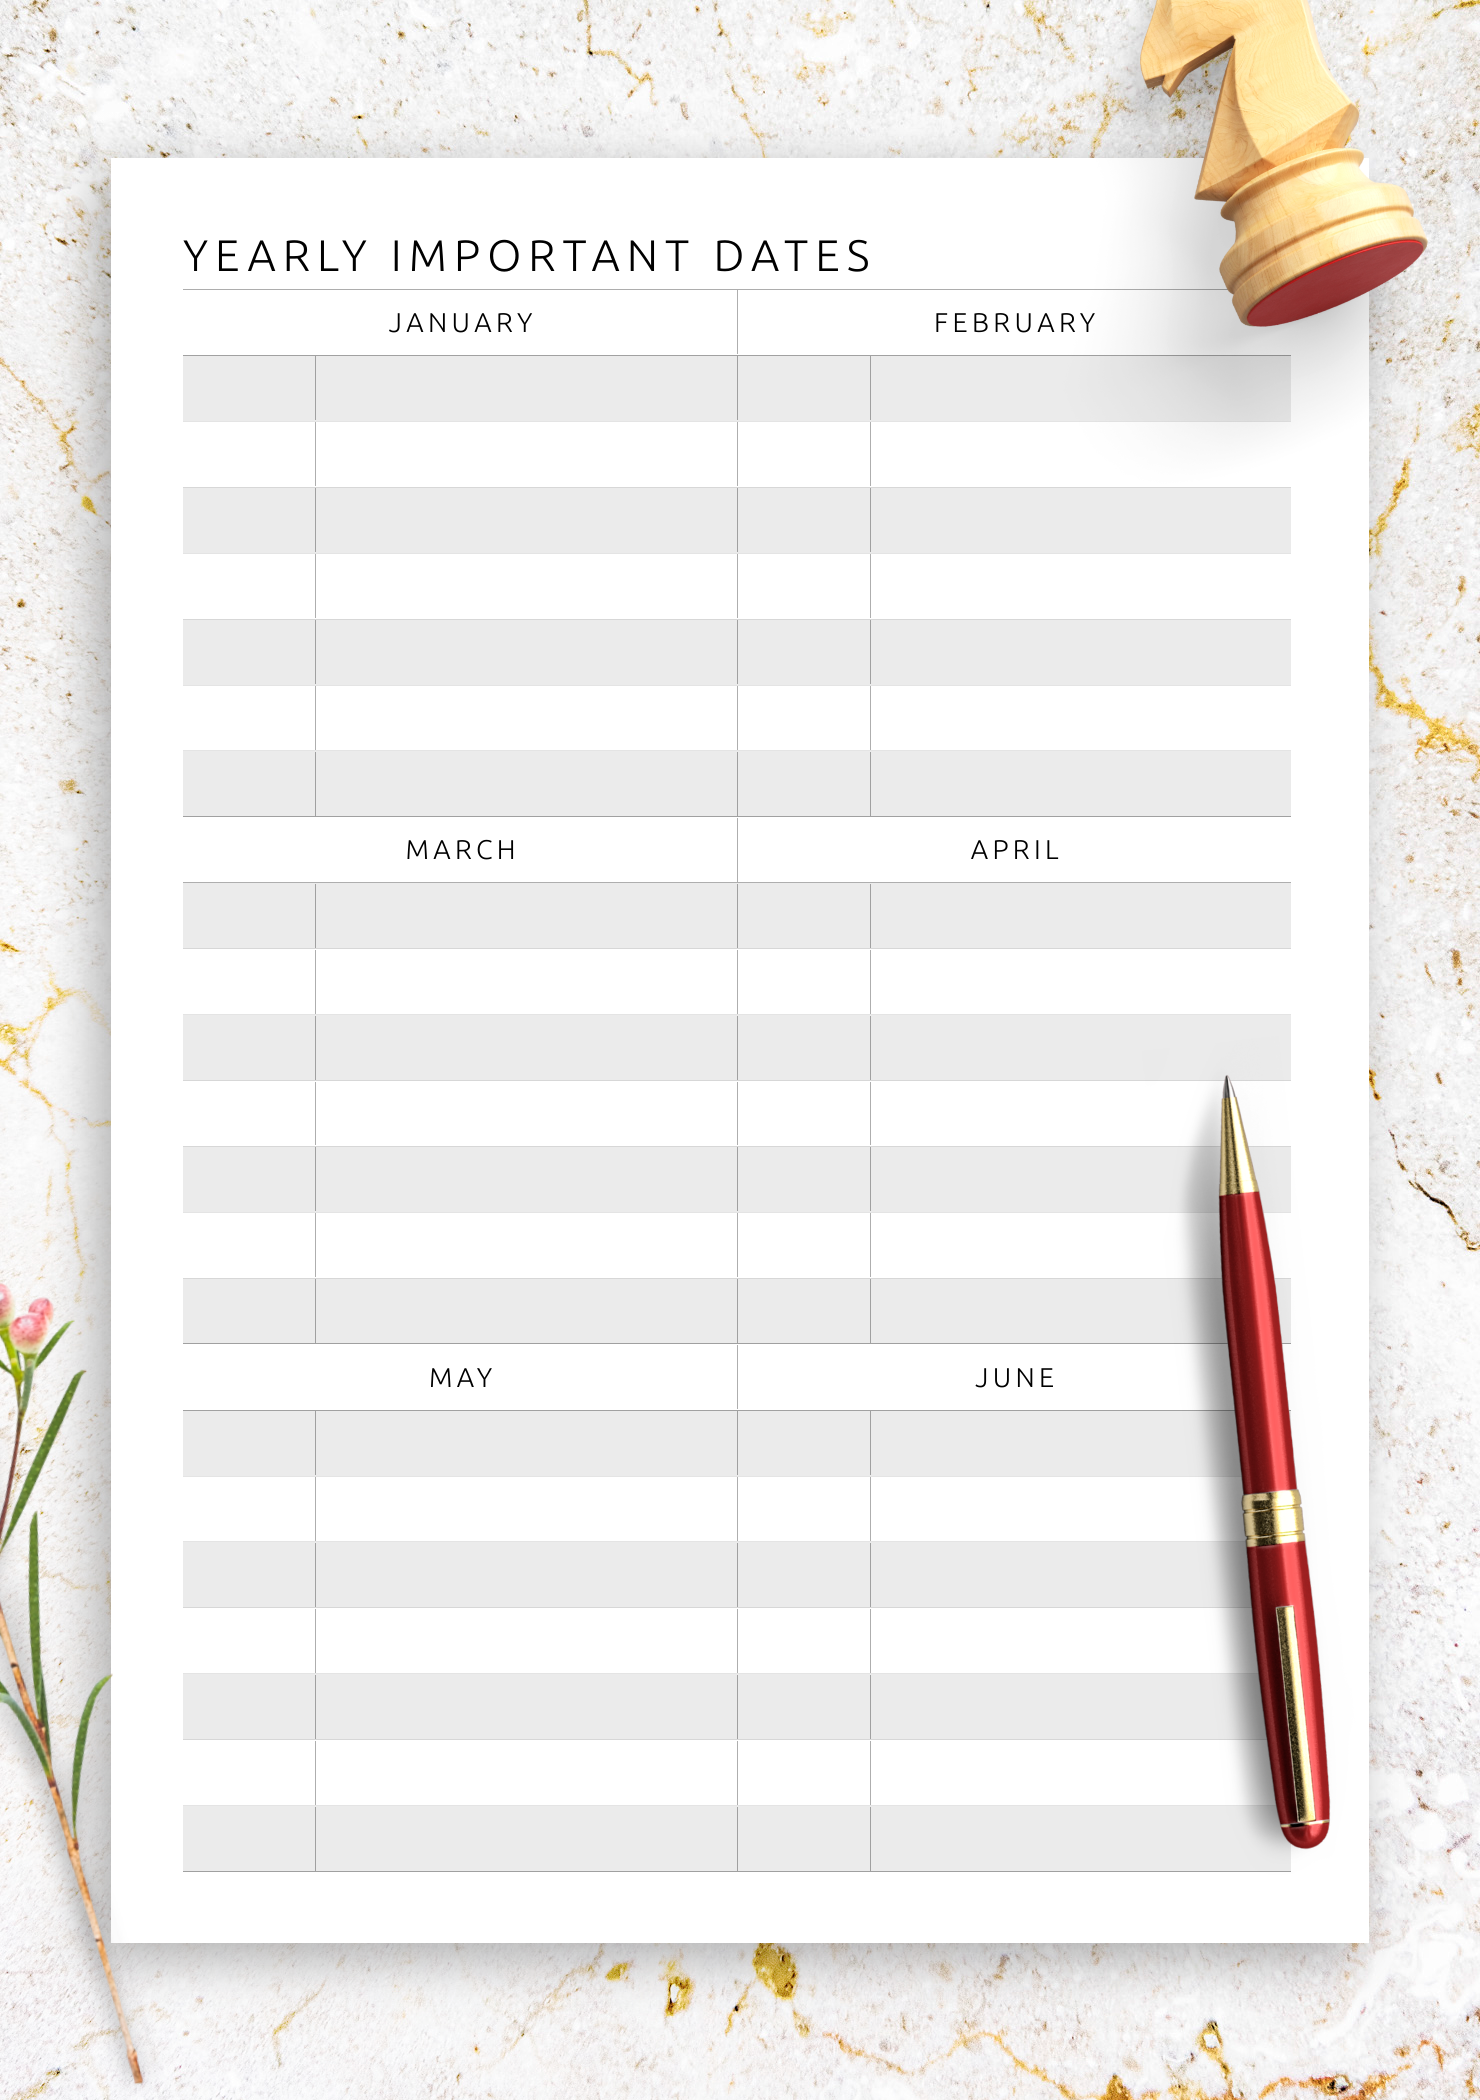 Download Printable Yearly Important Dates Template PDF